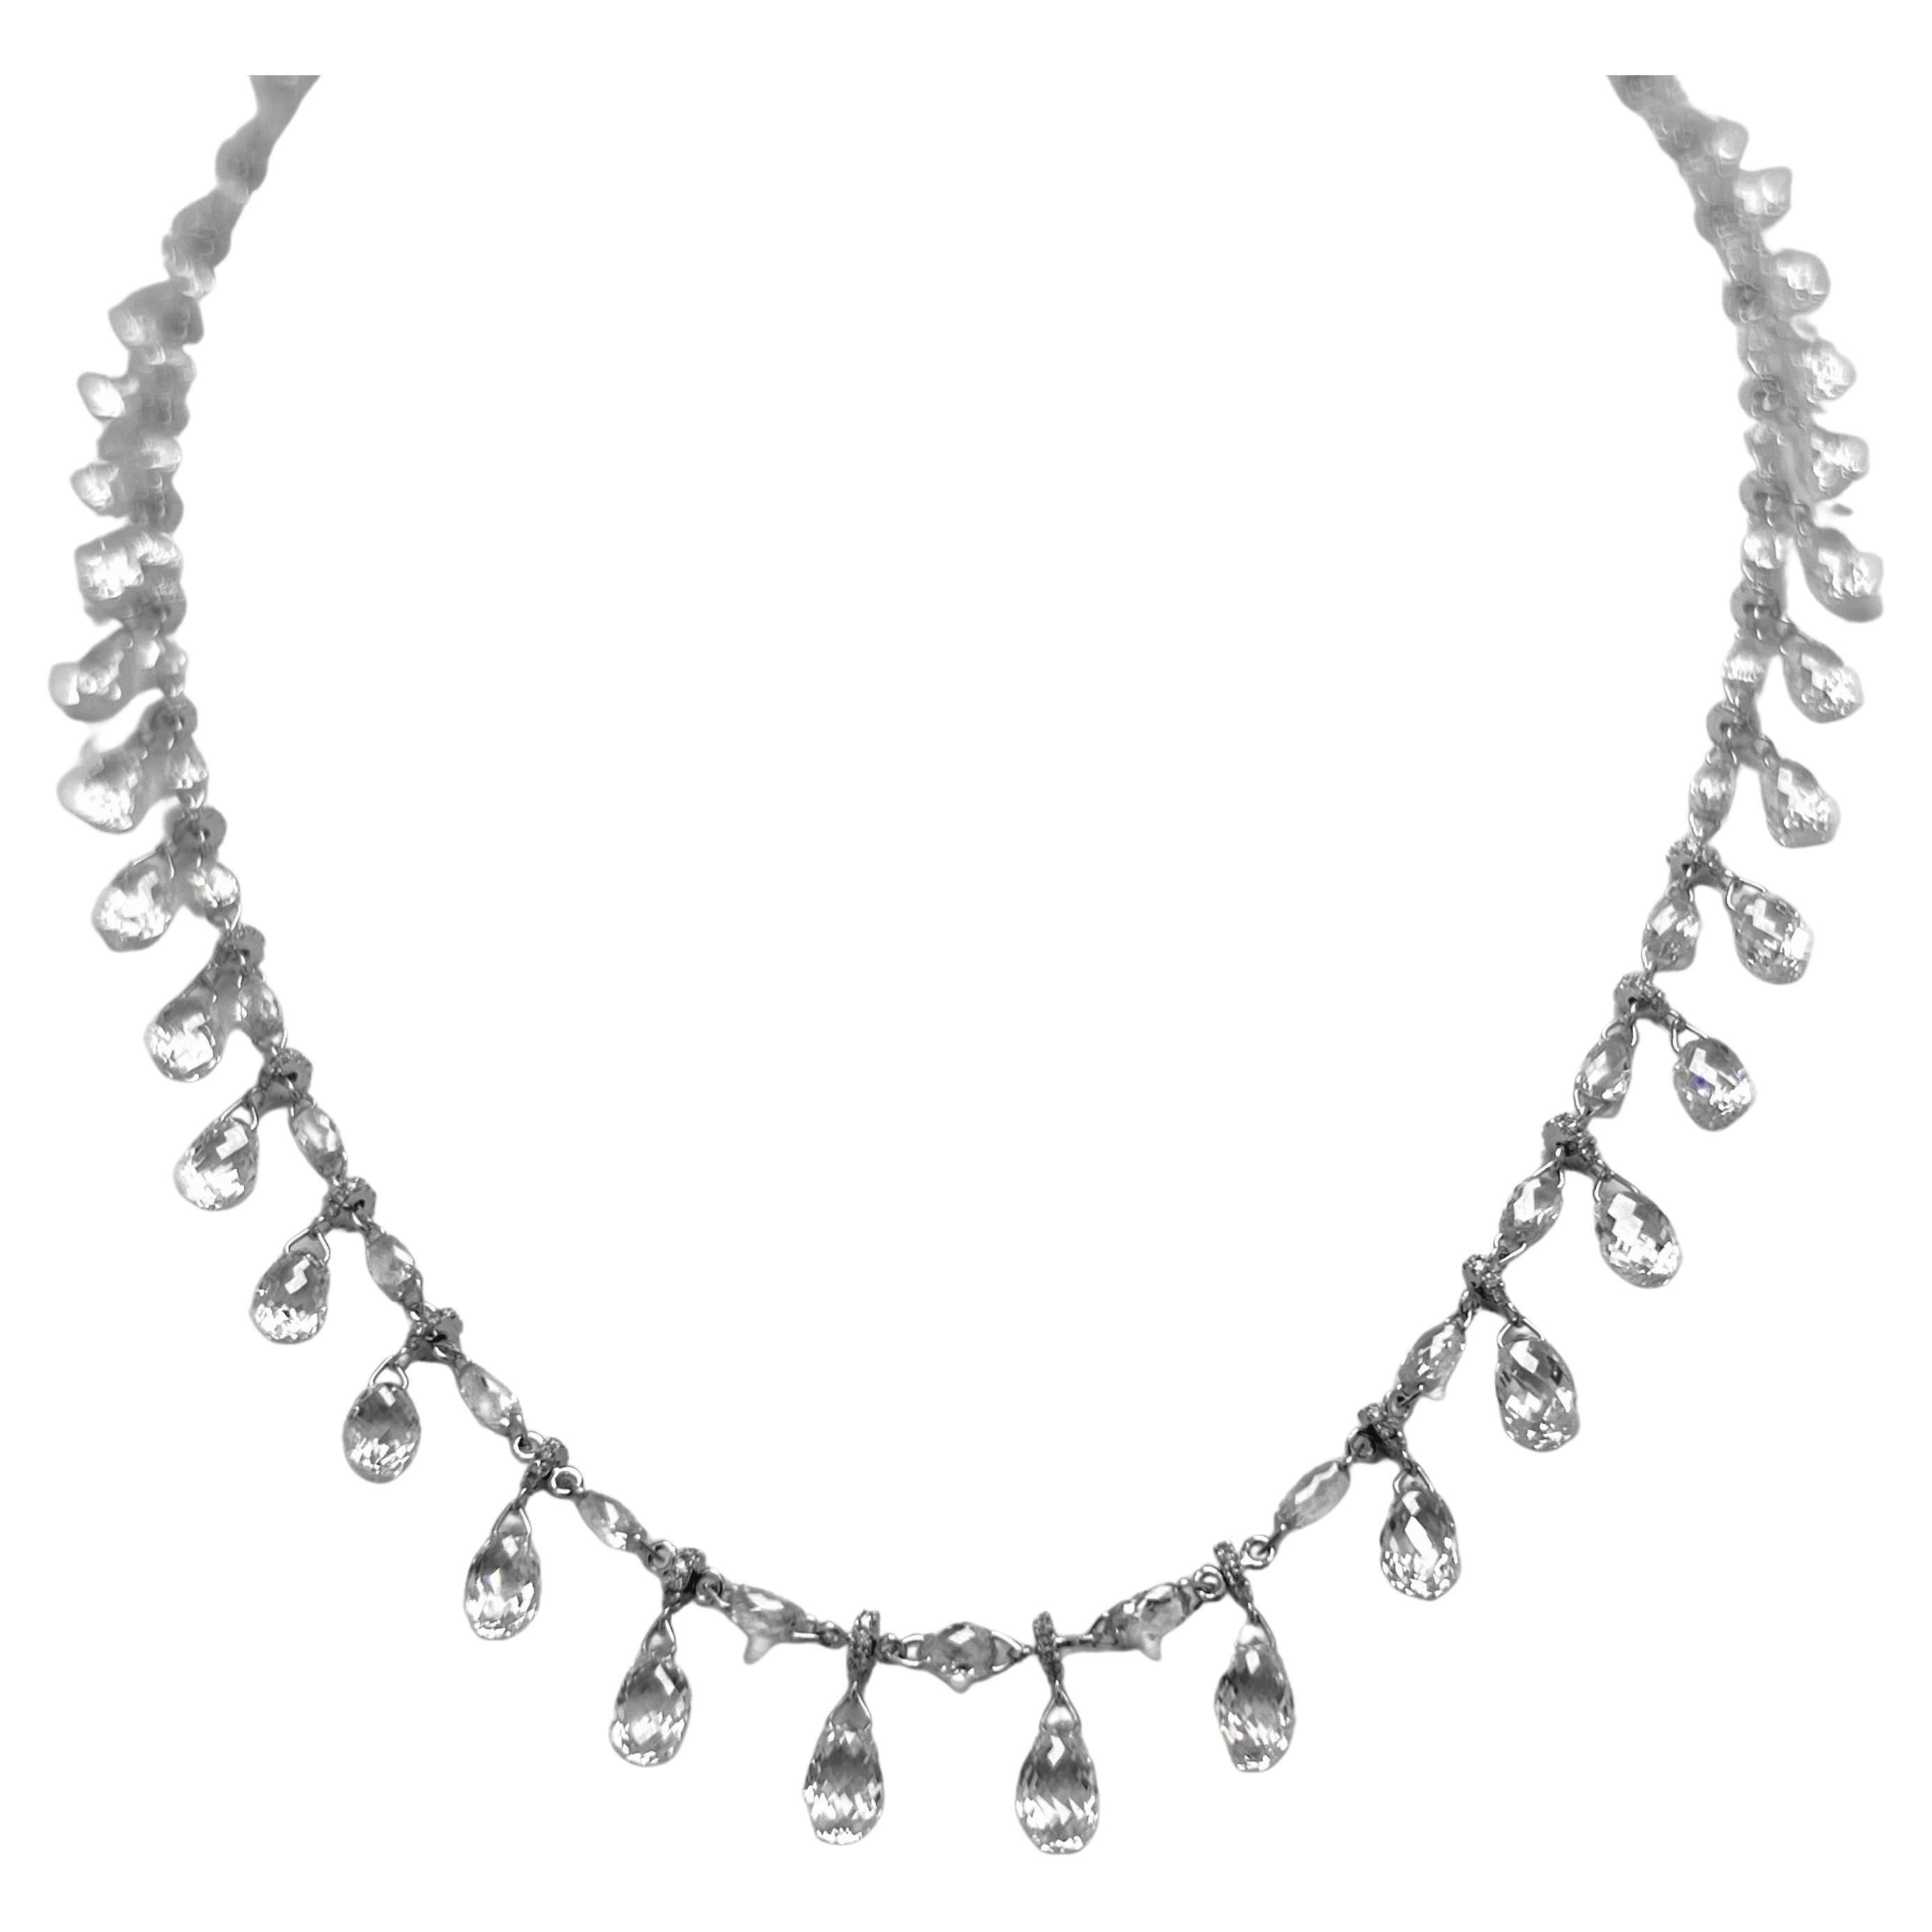 32.98 Carat 1920 Inspired Dangling Briolette Diamond Necklace on 18K White Gold For Sale